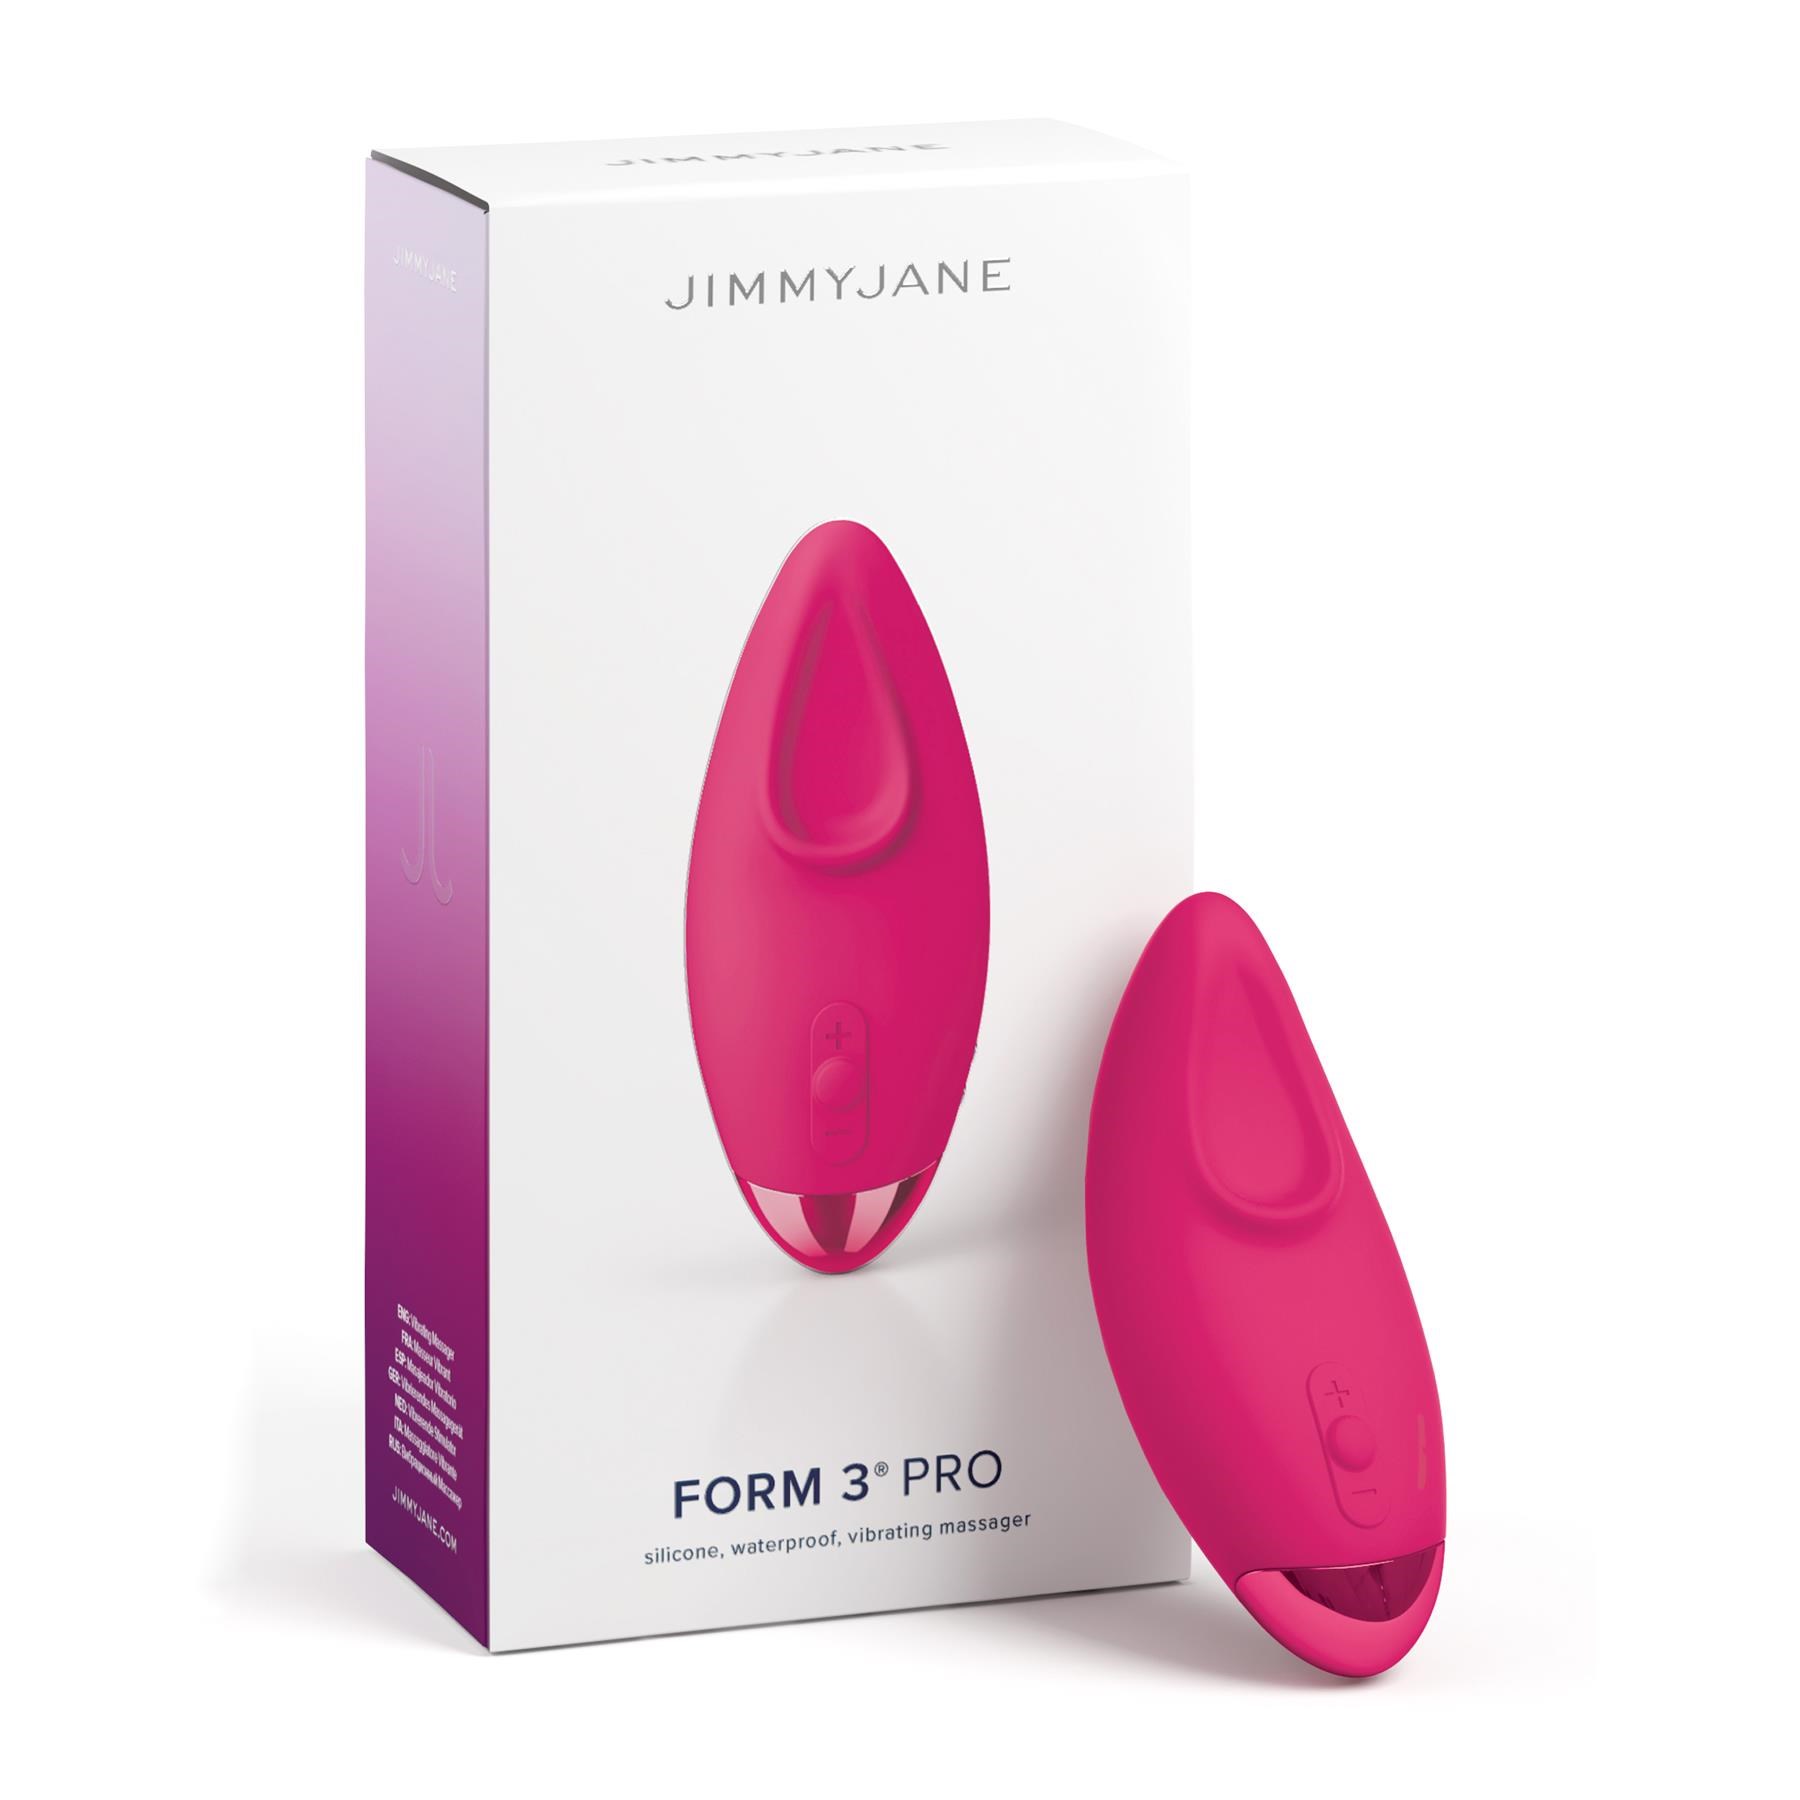 Jimmy Jane Form 3 Pro Lay-On Vibrator - Product and Packaging